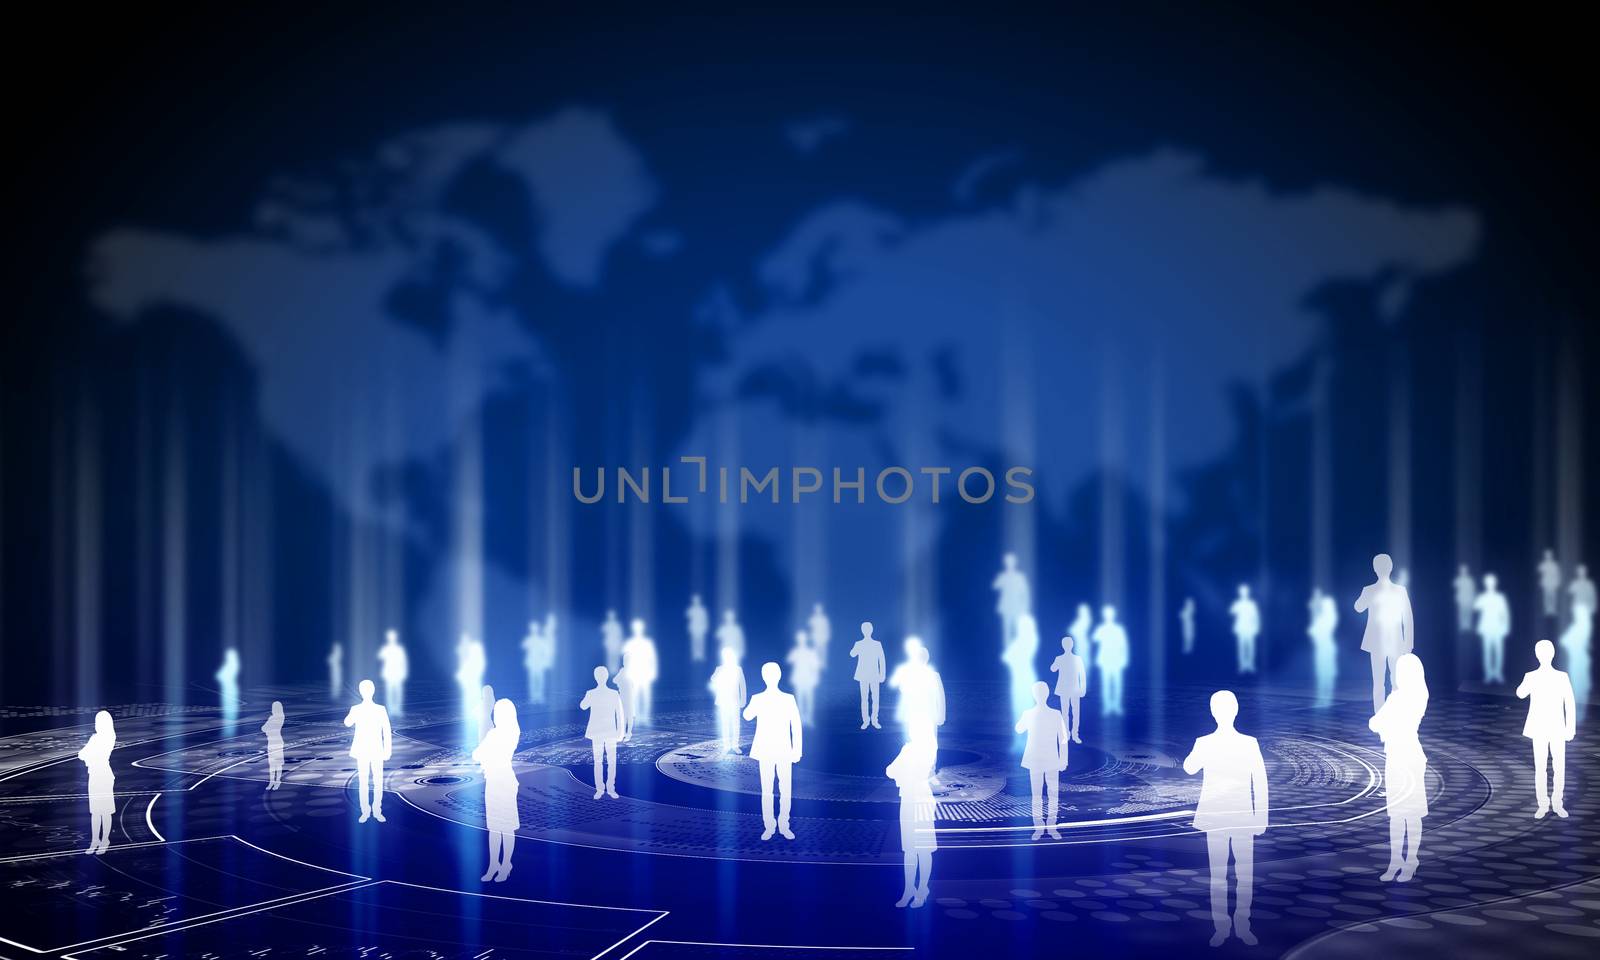 Background media image with icons. Social nets and communication